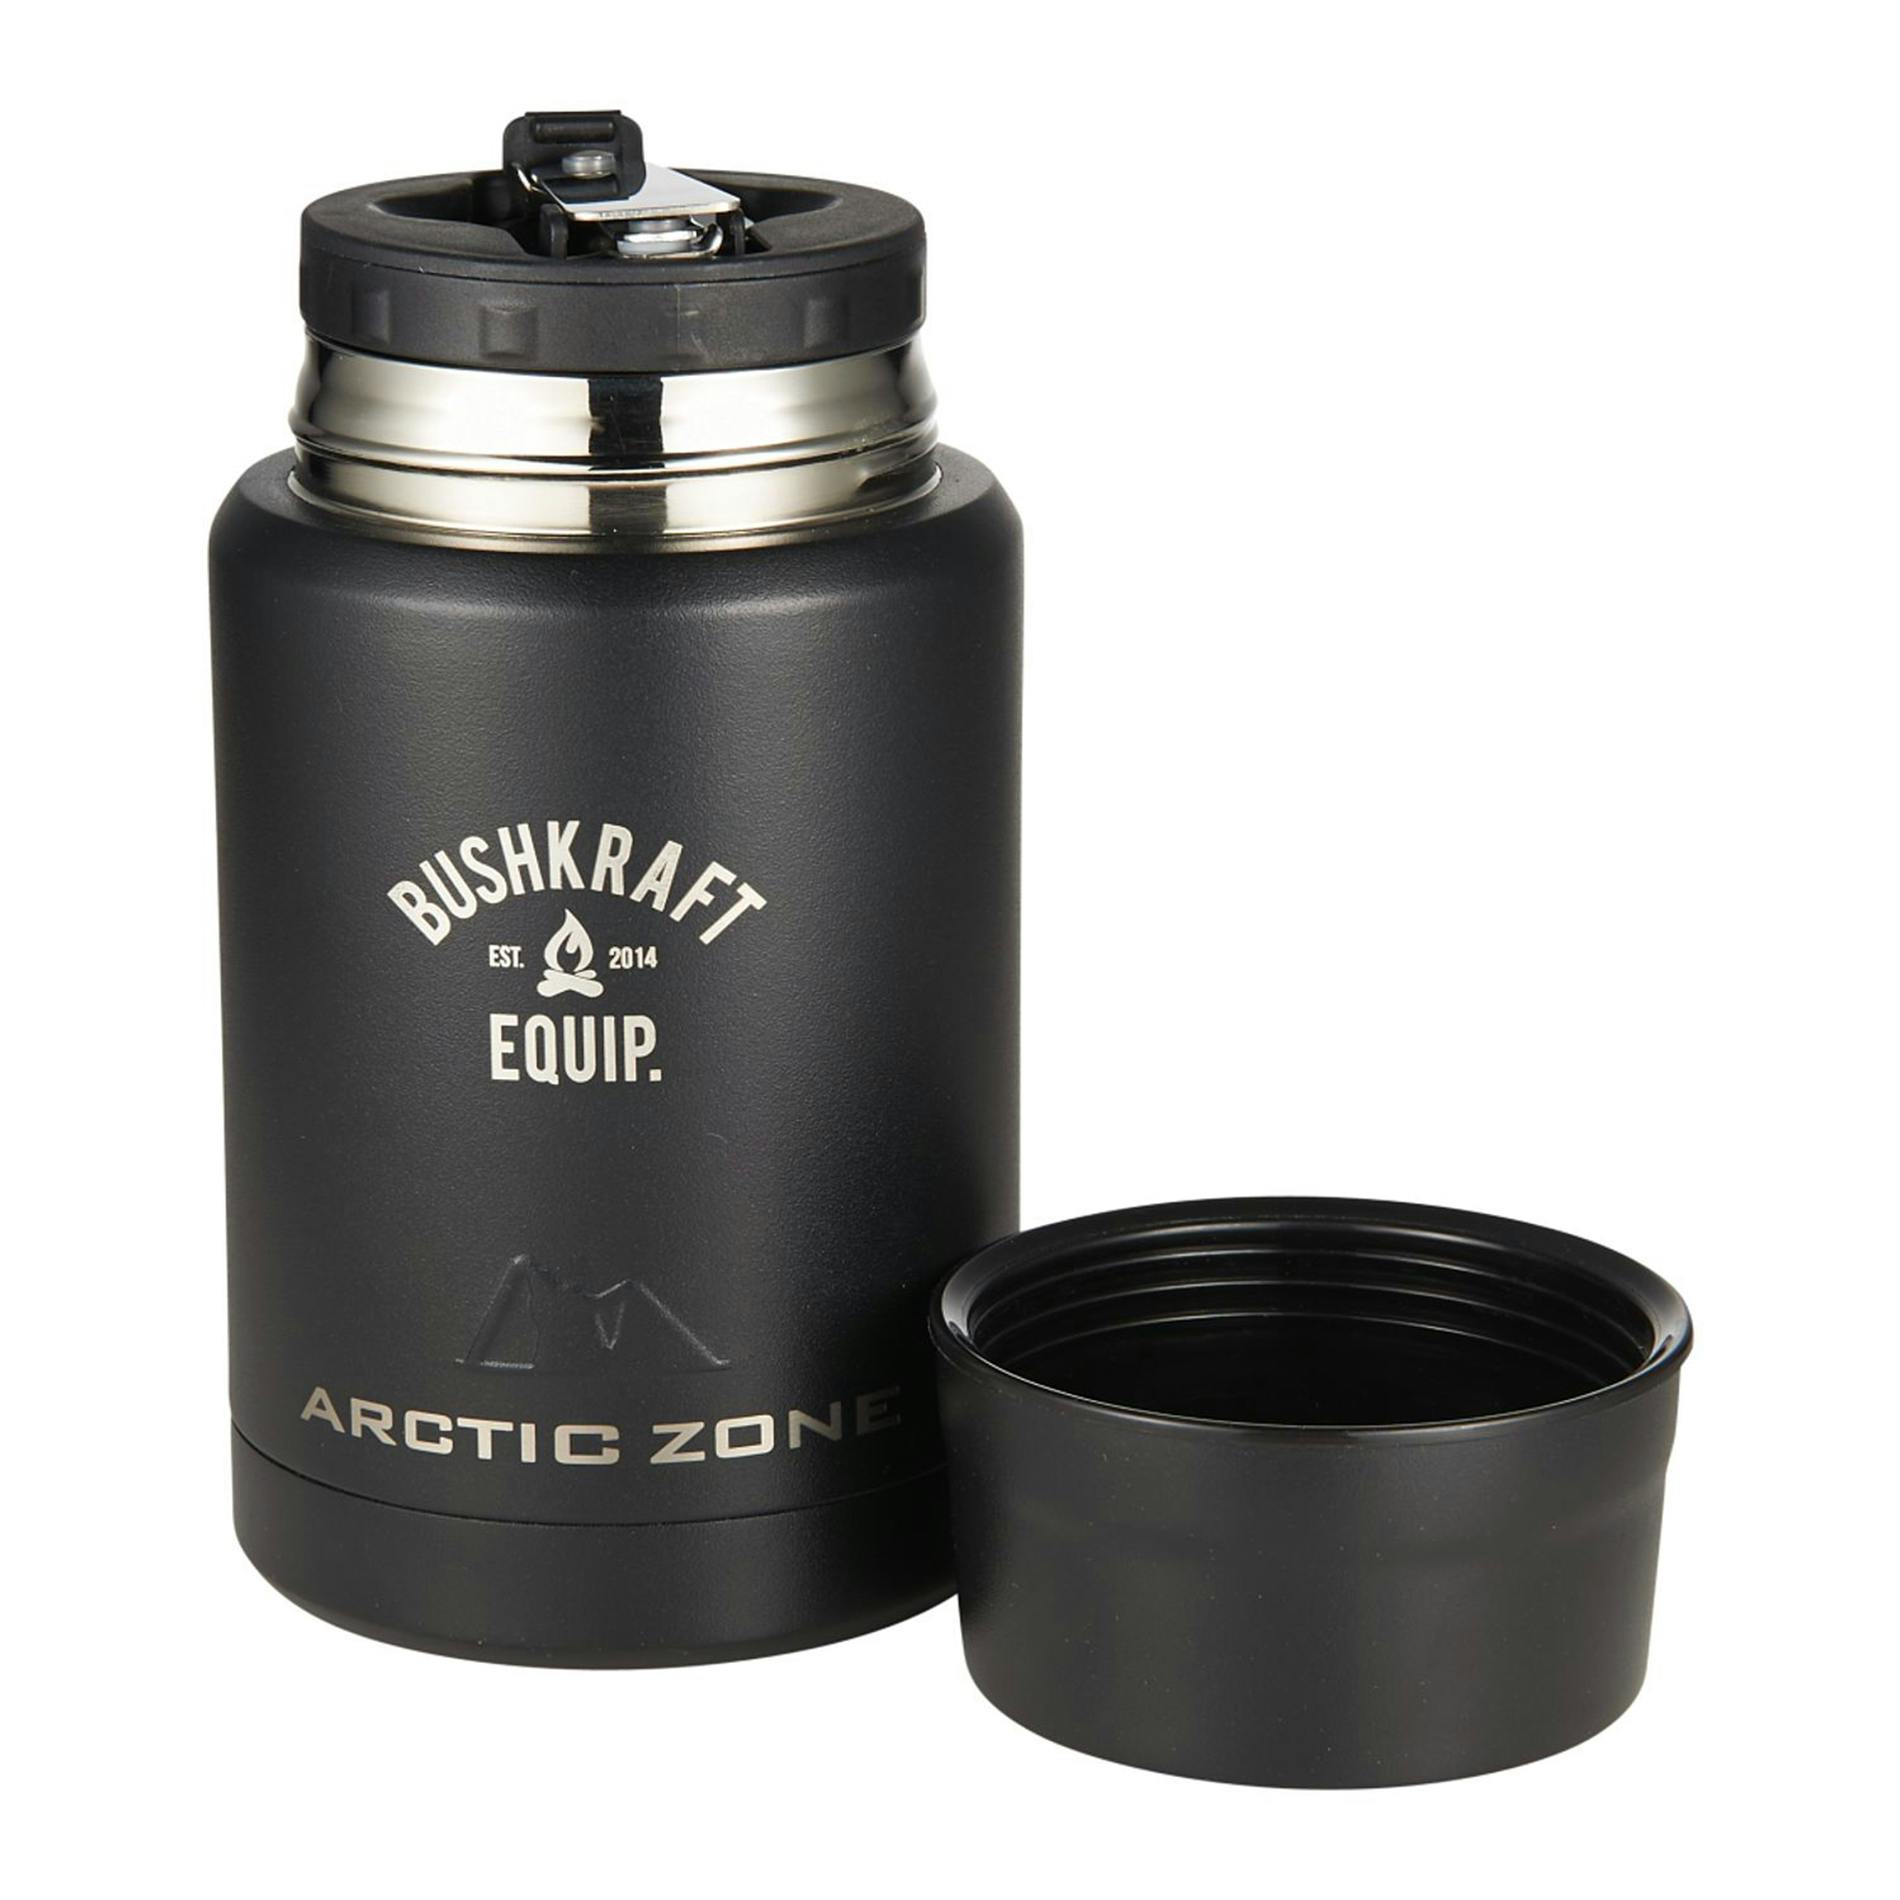 Arctic Zone® Titan Copper Insulated Food Storage - additional Image 5